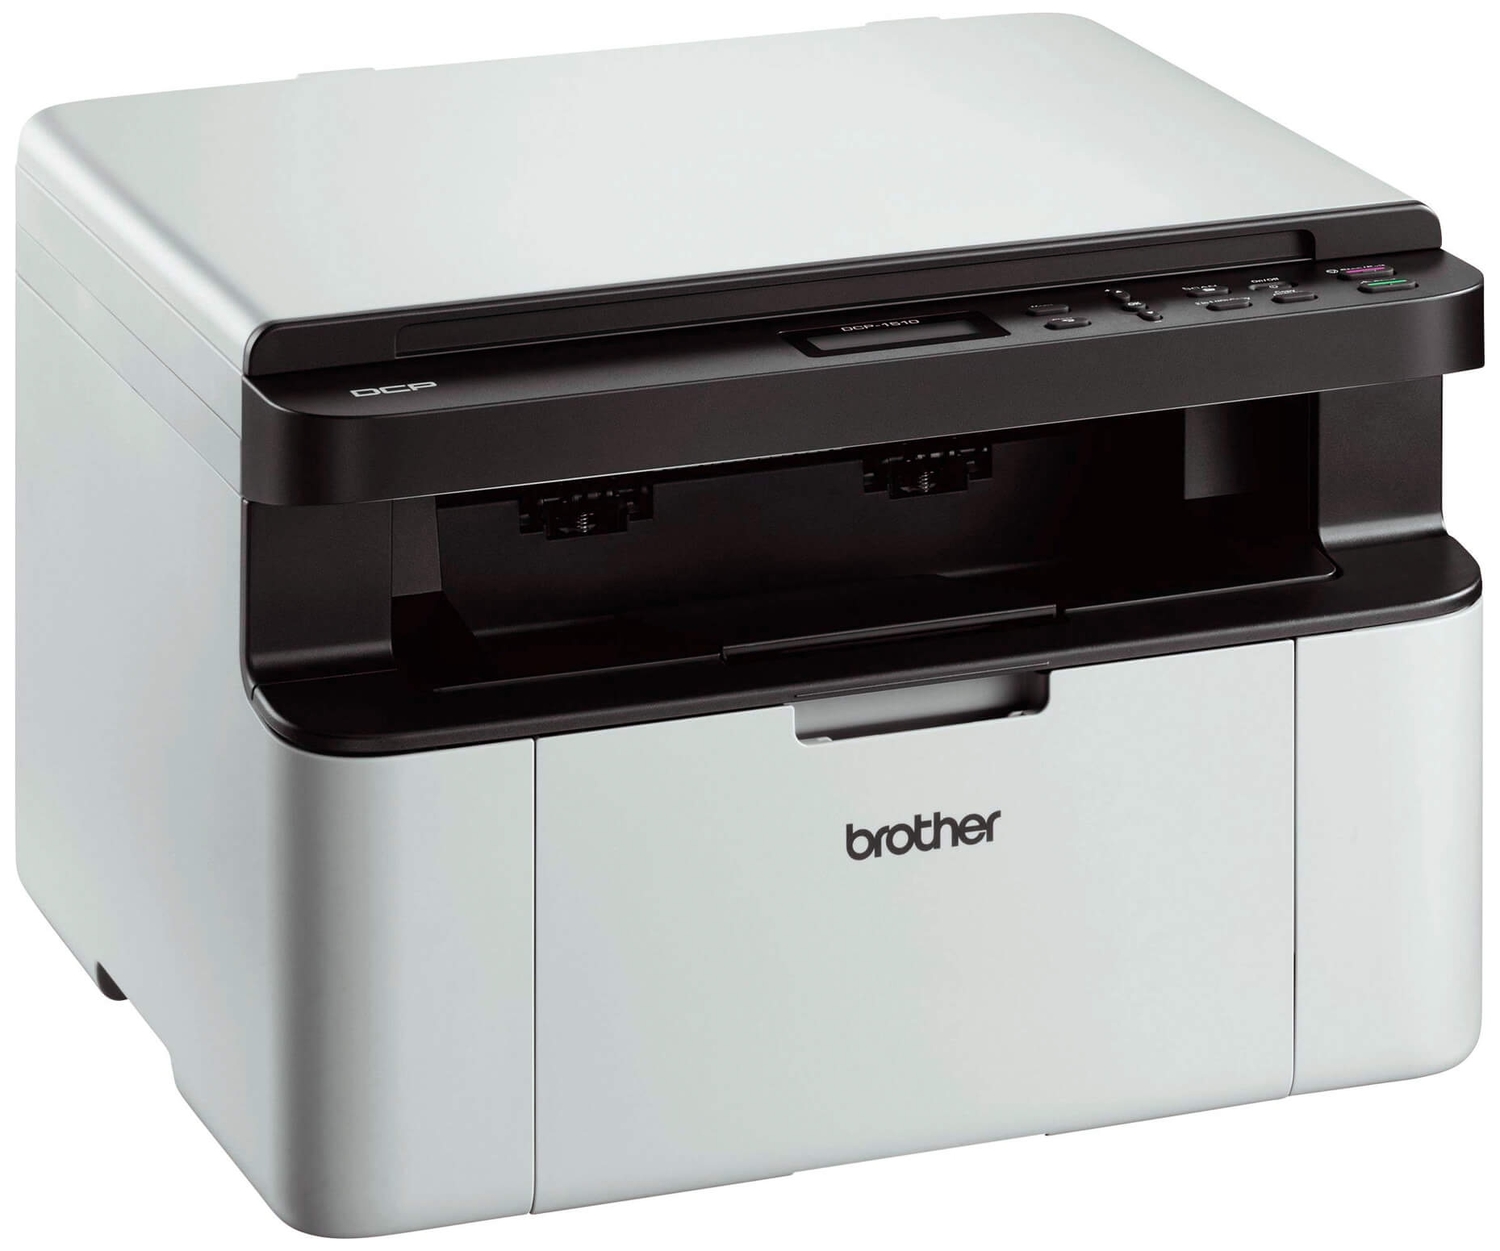 Brother dcp 1623wr. МФУ brother MFC-1815r. МФУ brother DCP-1510r. MFC-1810r.